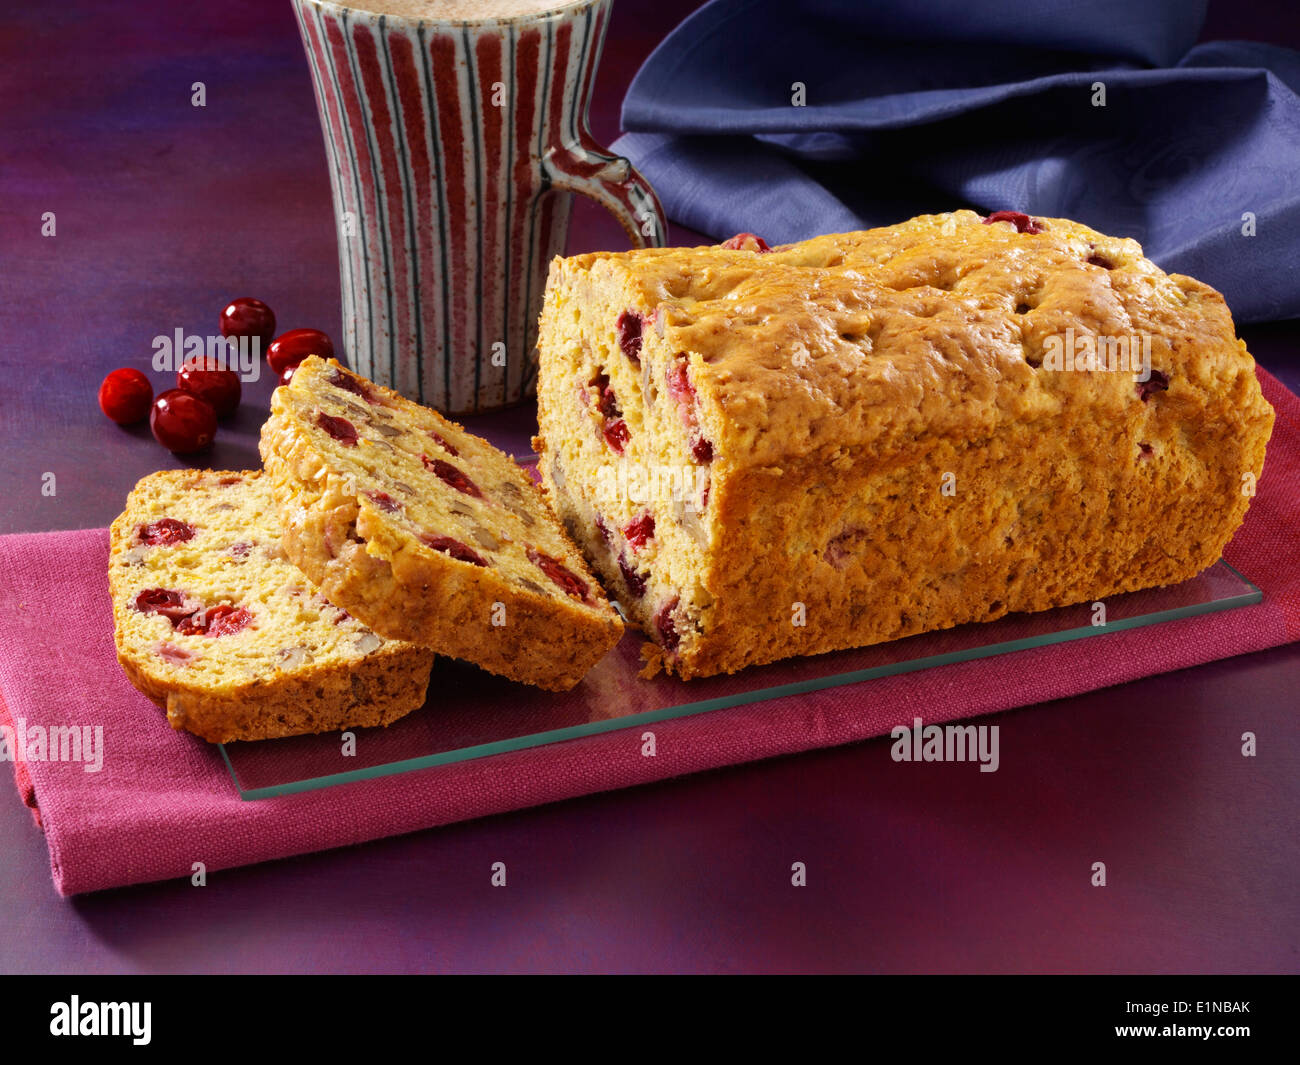 Cranberry loaf home made fruit teatime treat Stock Photo